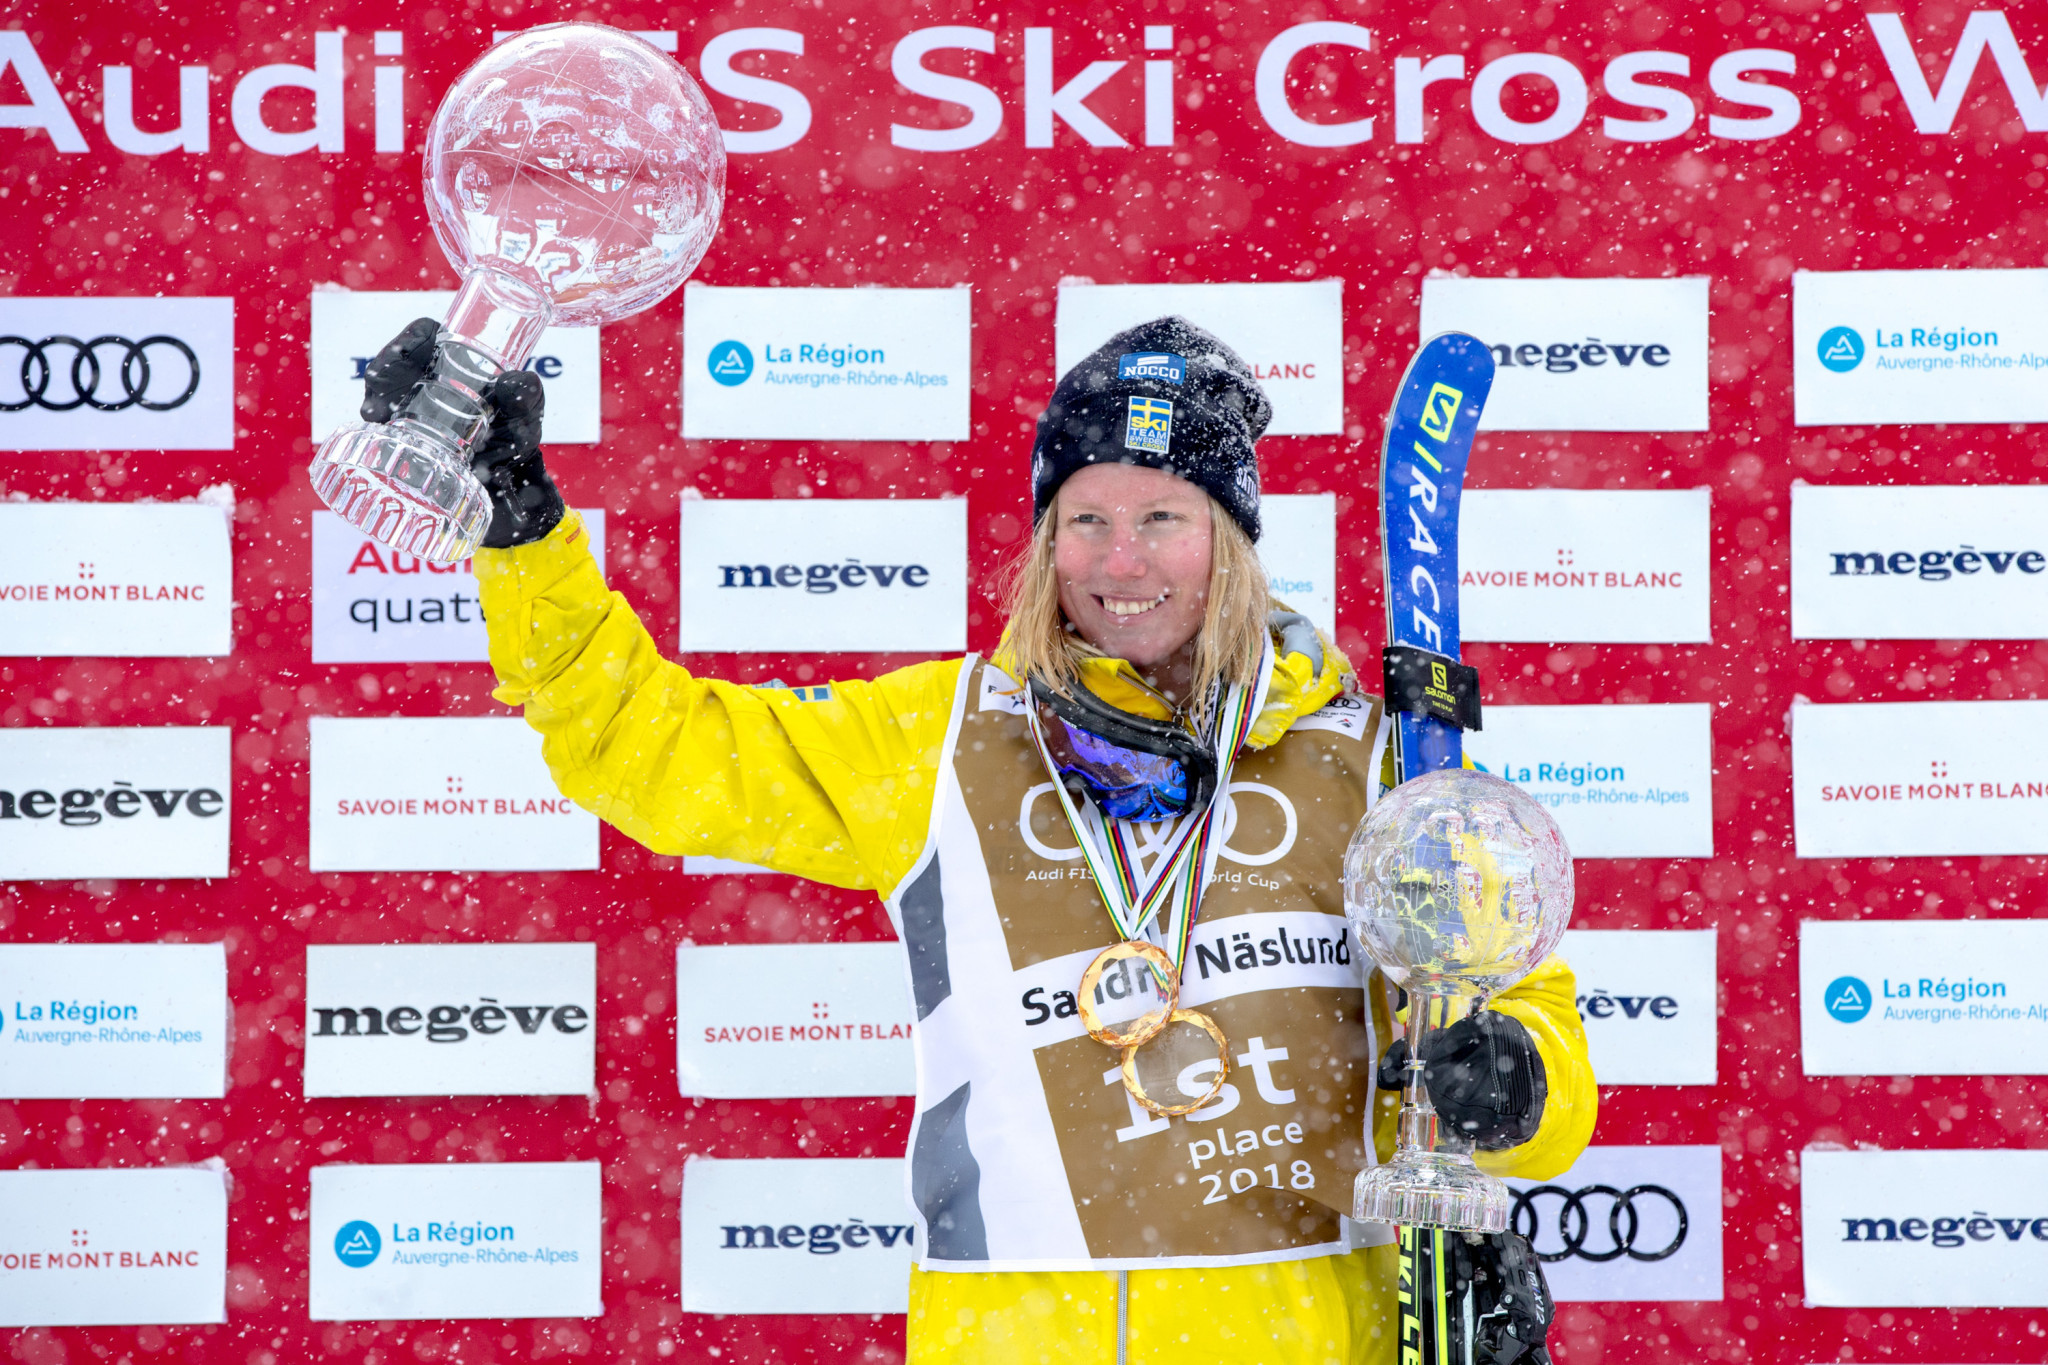 Sweden's Sandra Naeslund will be looking to extend her lead in the FIS Ski Cross World Cup standings when she competes in front of a home crowd in Idre Fjall this weekend ©Getty Images